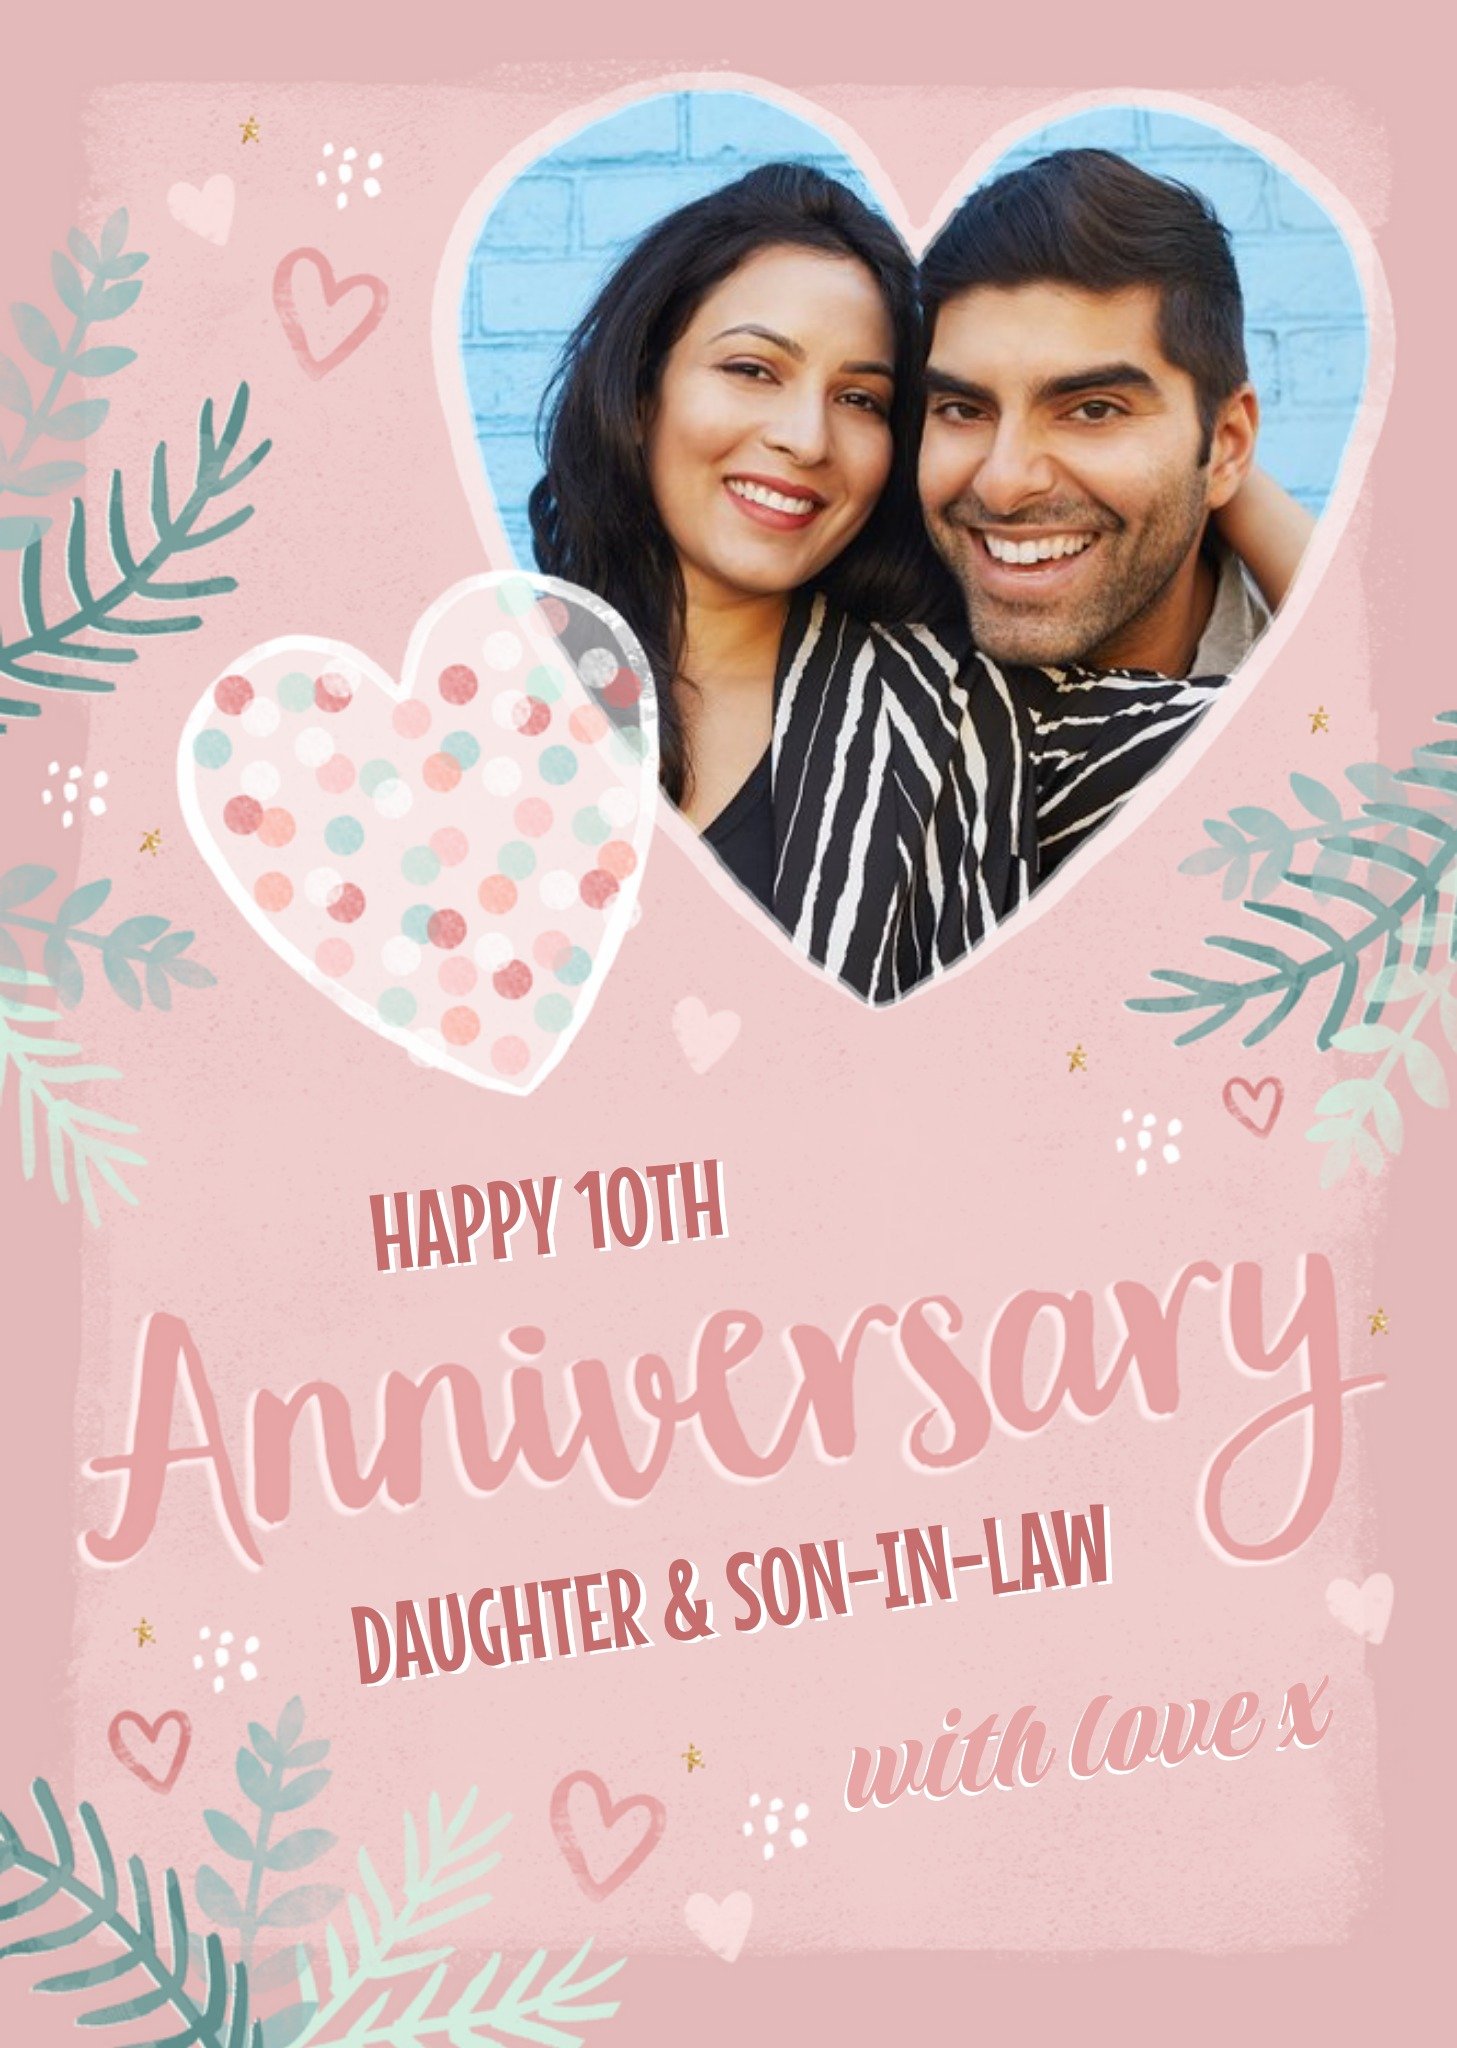 Moonpig Studio Sundae Happy 10th Anniversary Daughter And Son In Law Photo Upload Card Ecard